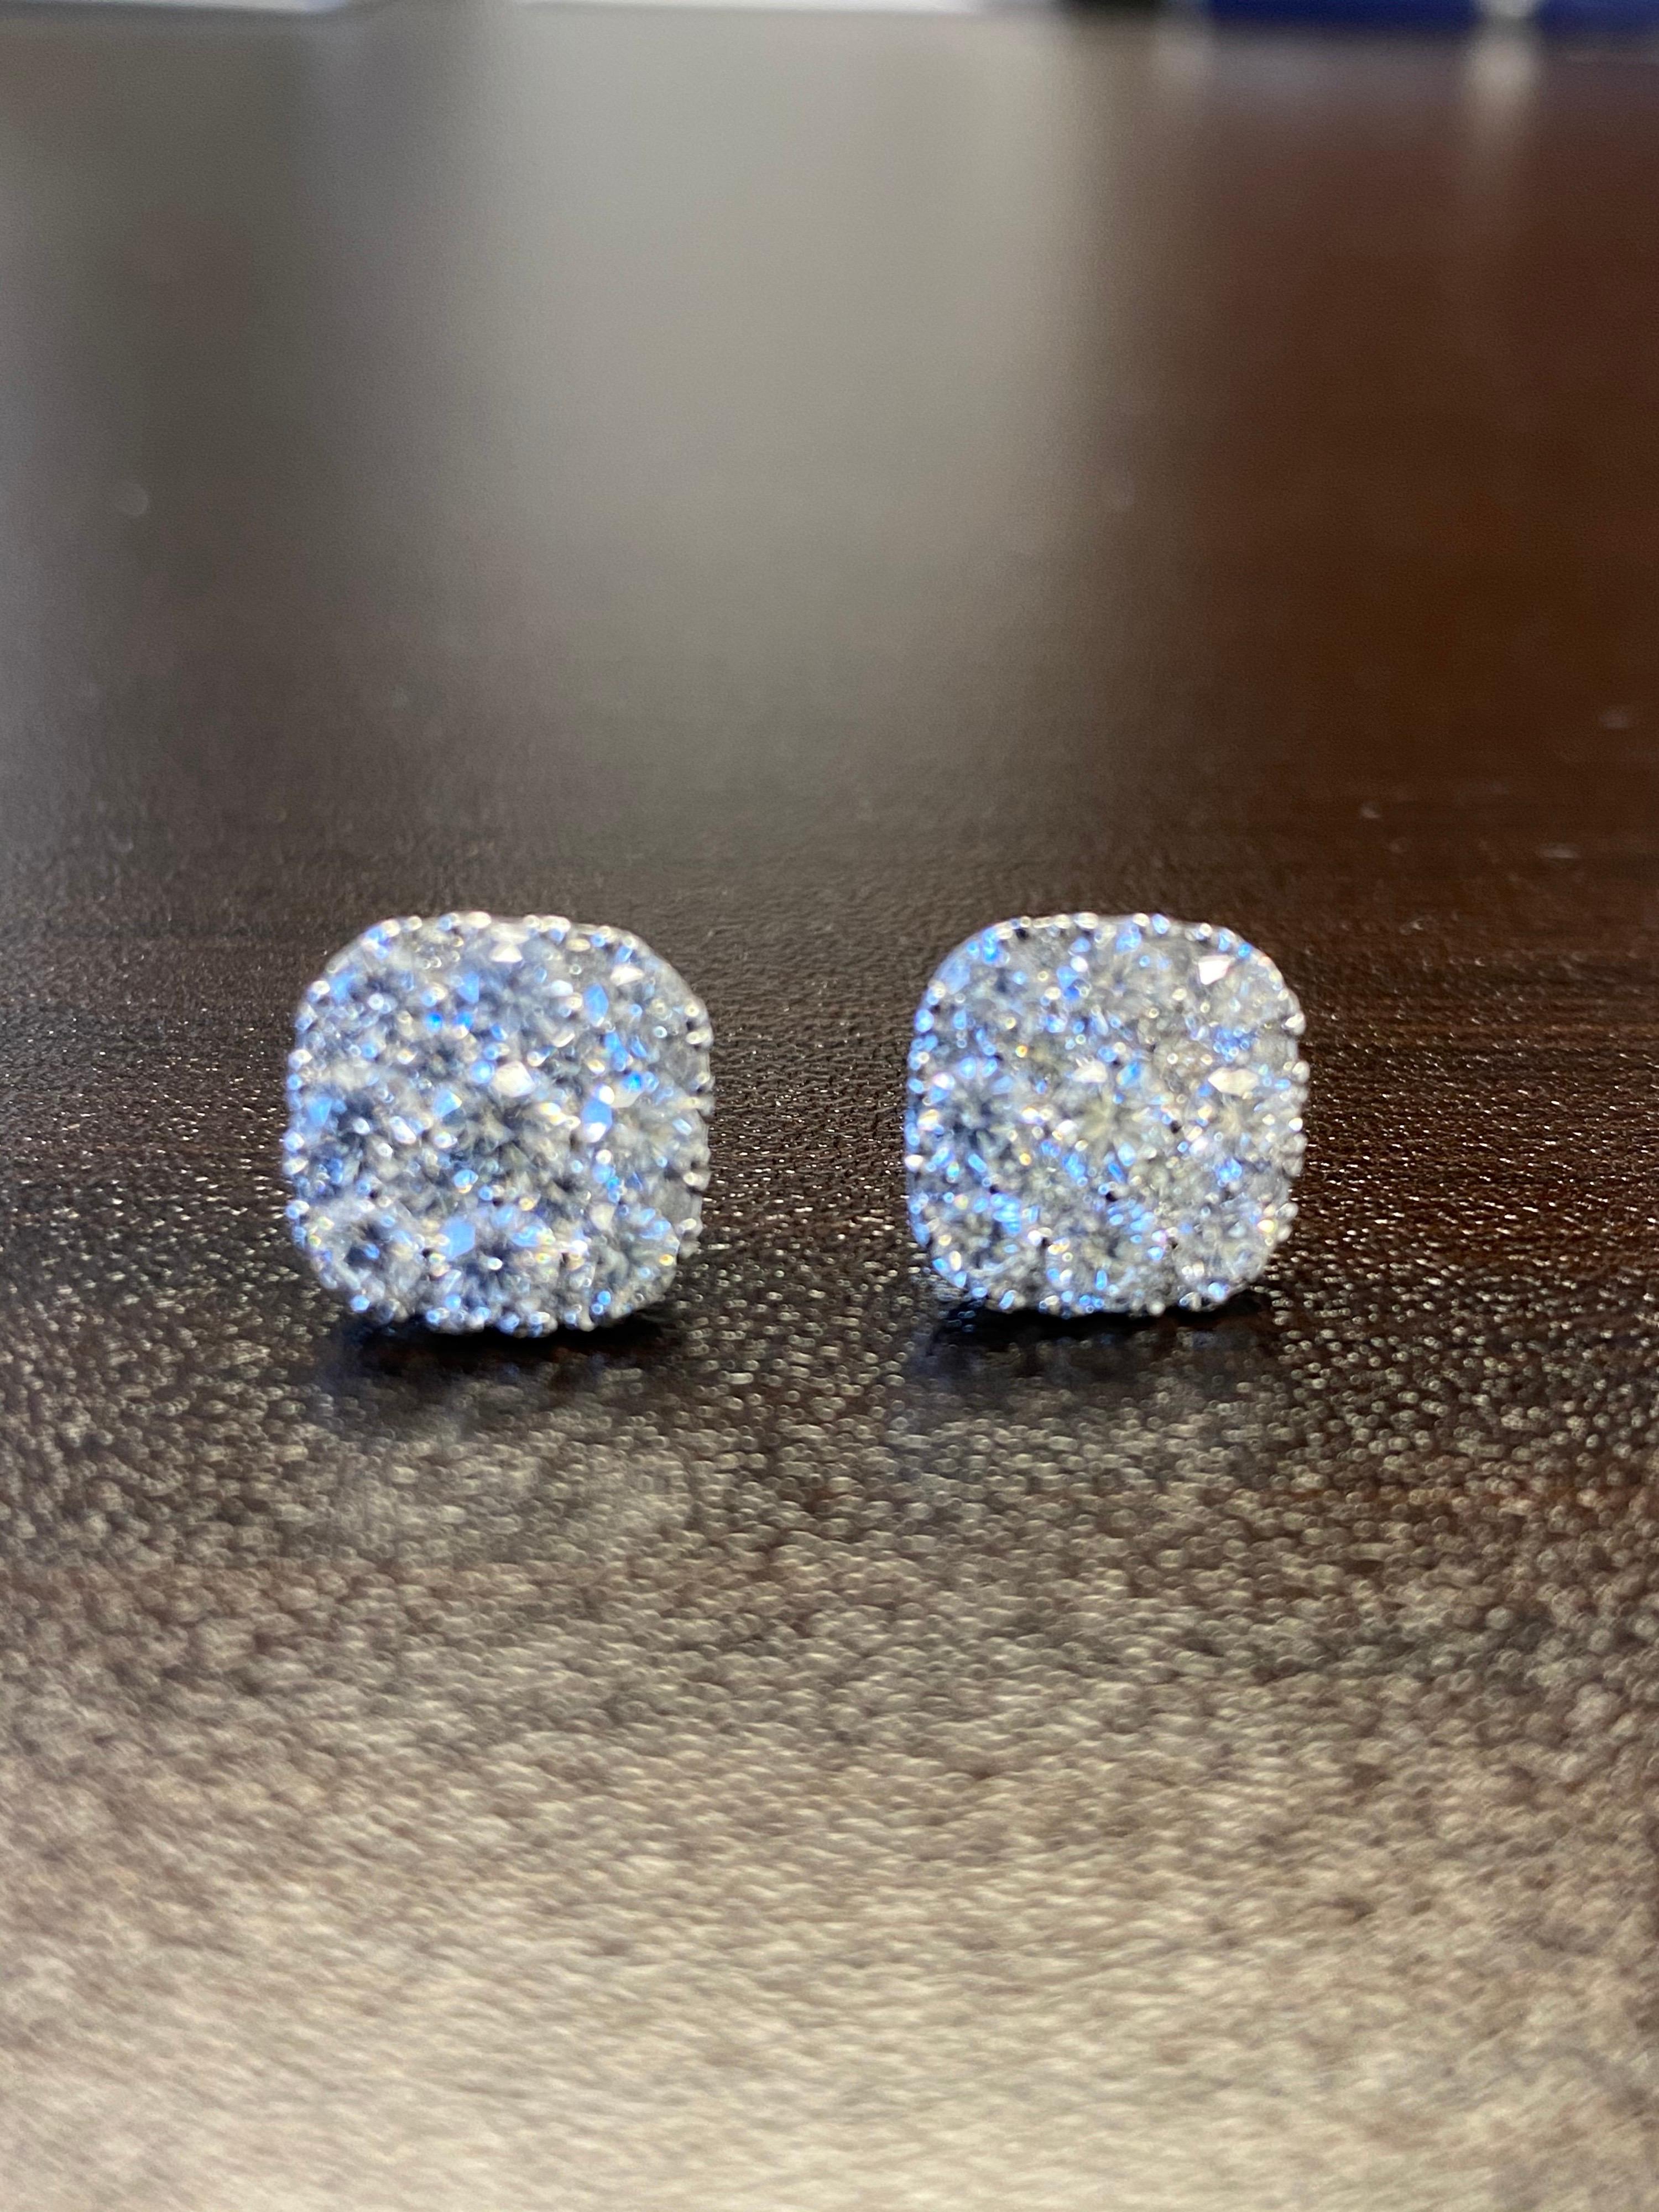 Diamond earrings set in 18K white gold. The earrings are a set with a cluster of round diamonds in a cushion style look. The total diamond weight is 2.82 carats. The color of the stones are F, the clarity is VS1.